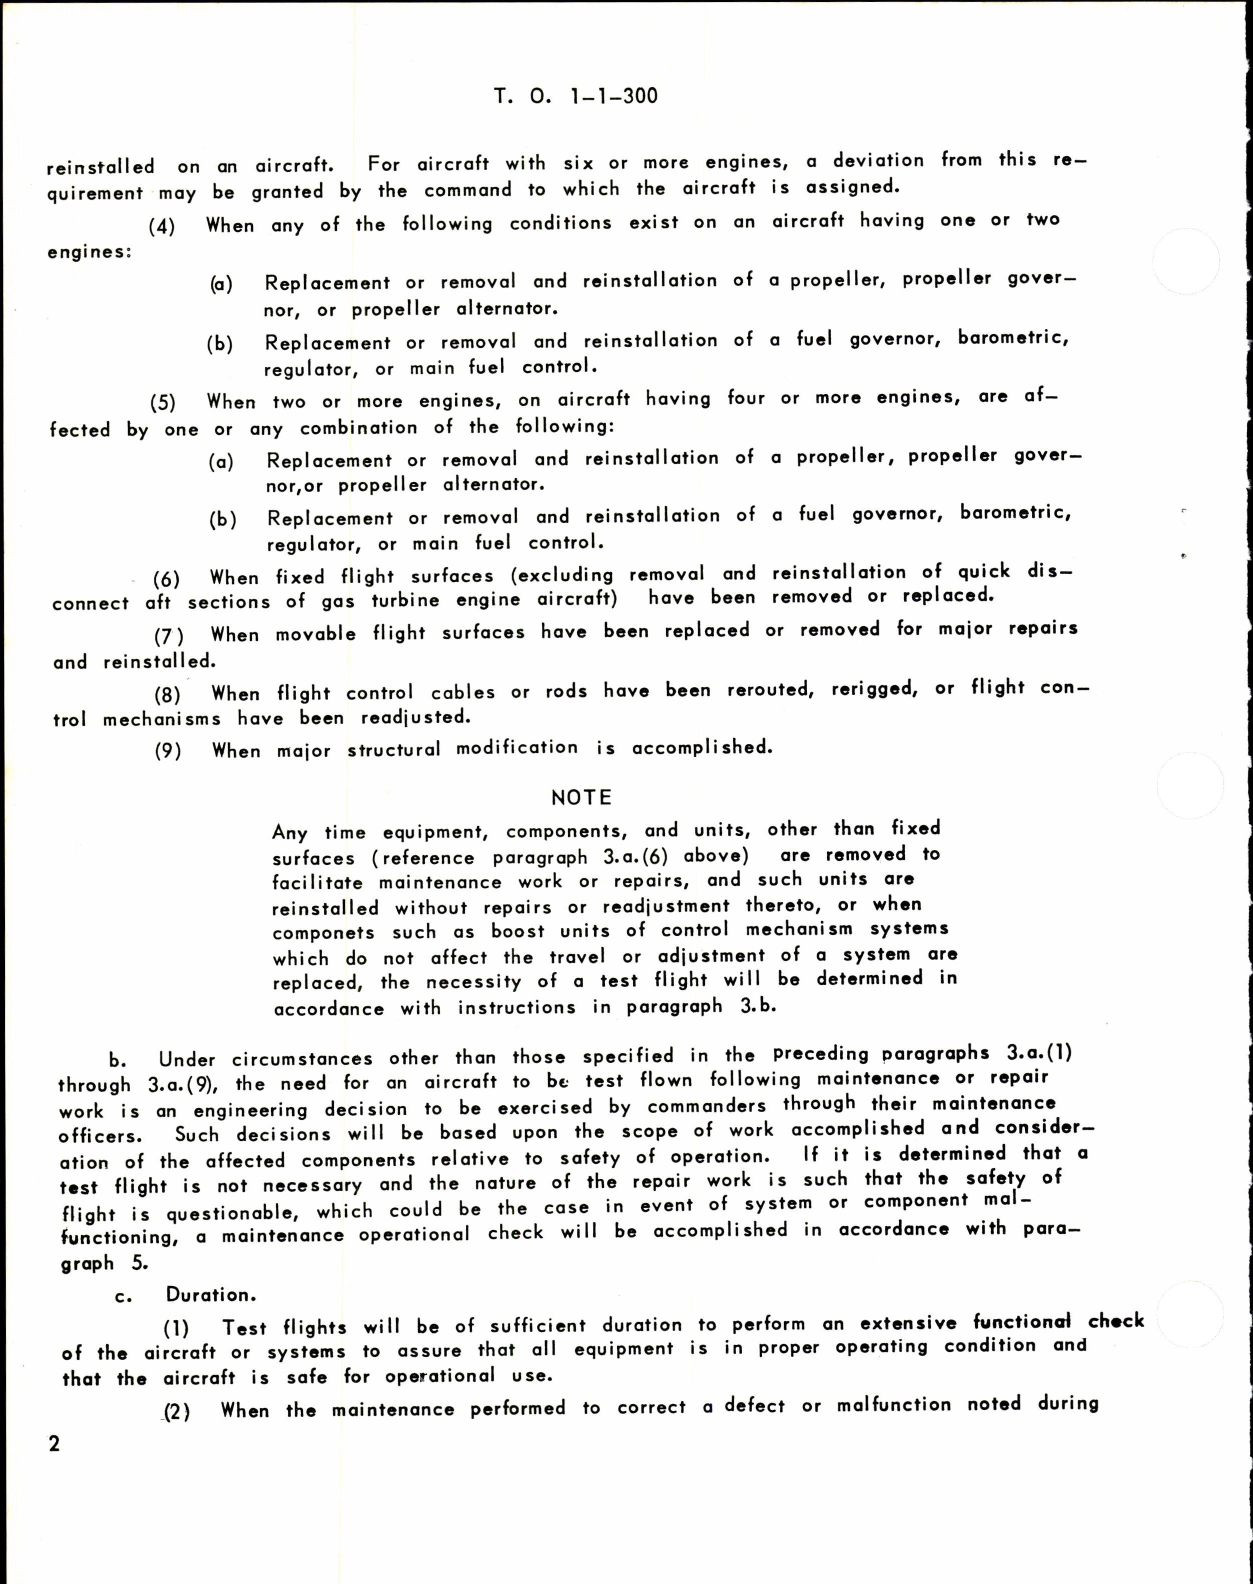 Sample page 2 from AirCorps Library document: Test Flight and Operational Checks